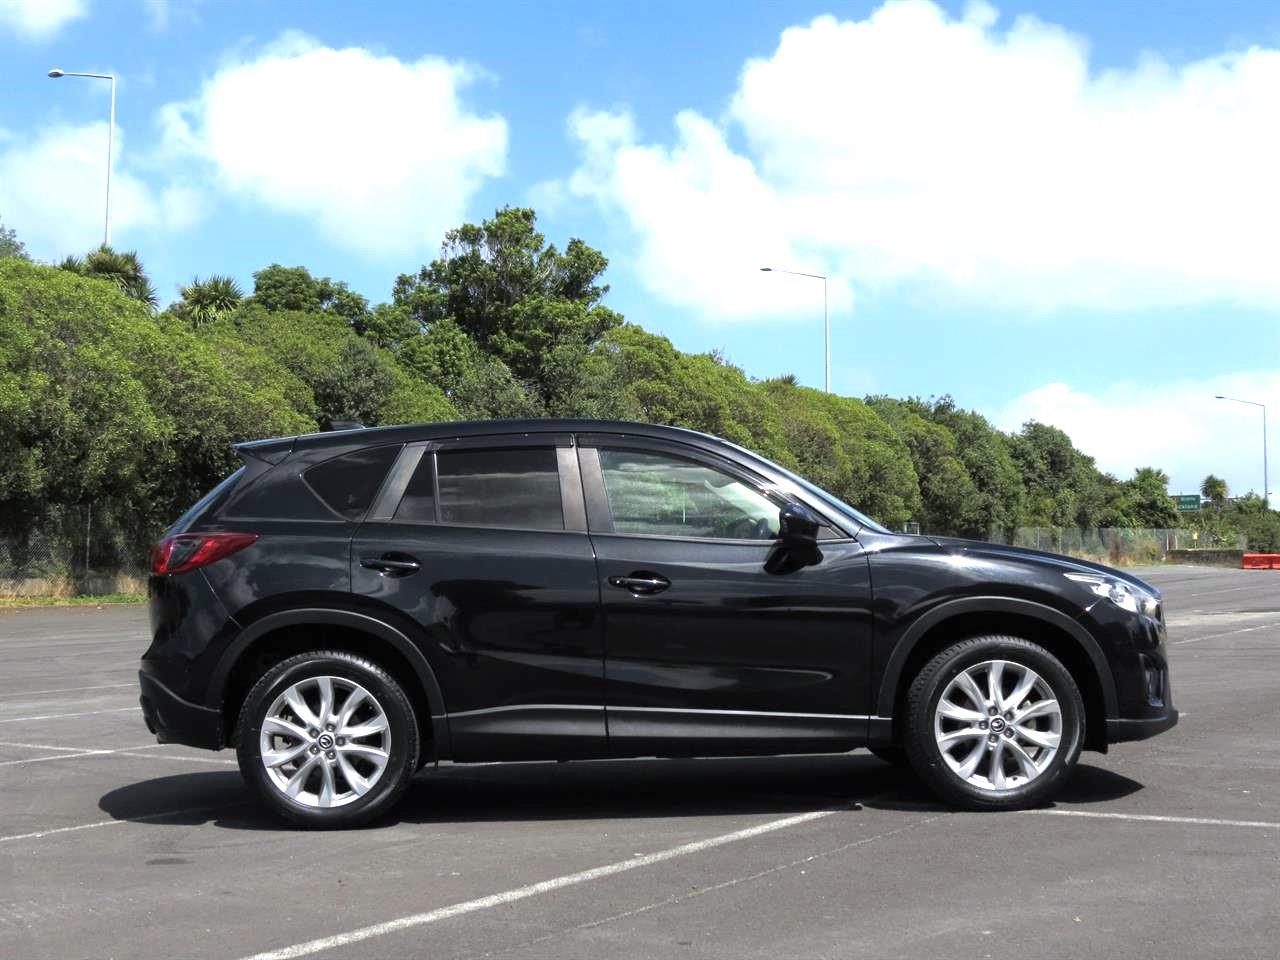 2014 Mazda CX-5 only $60 weekly